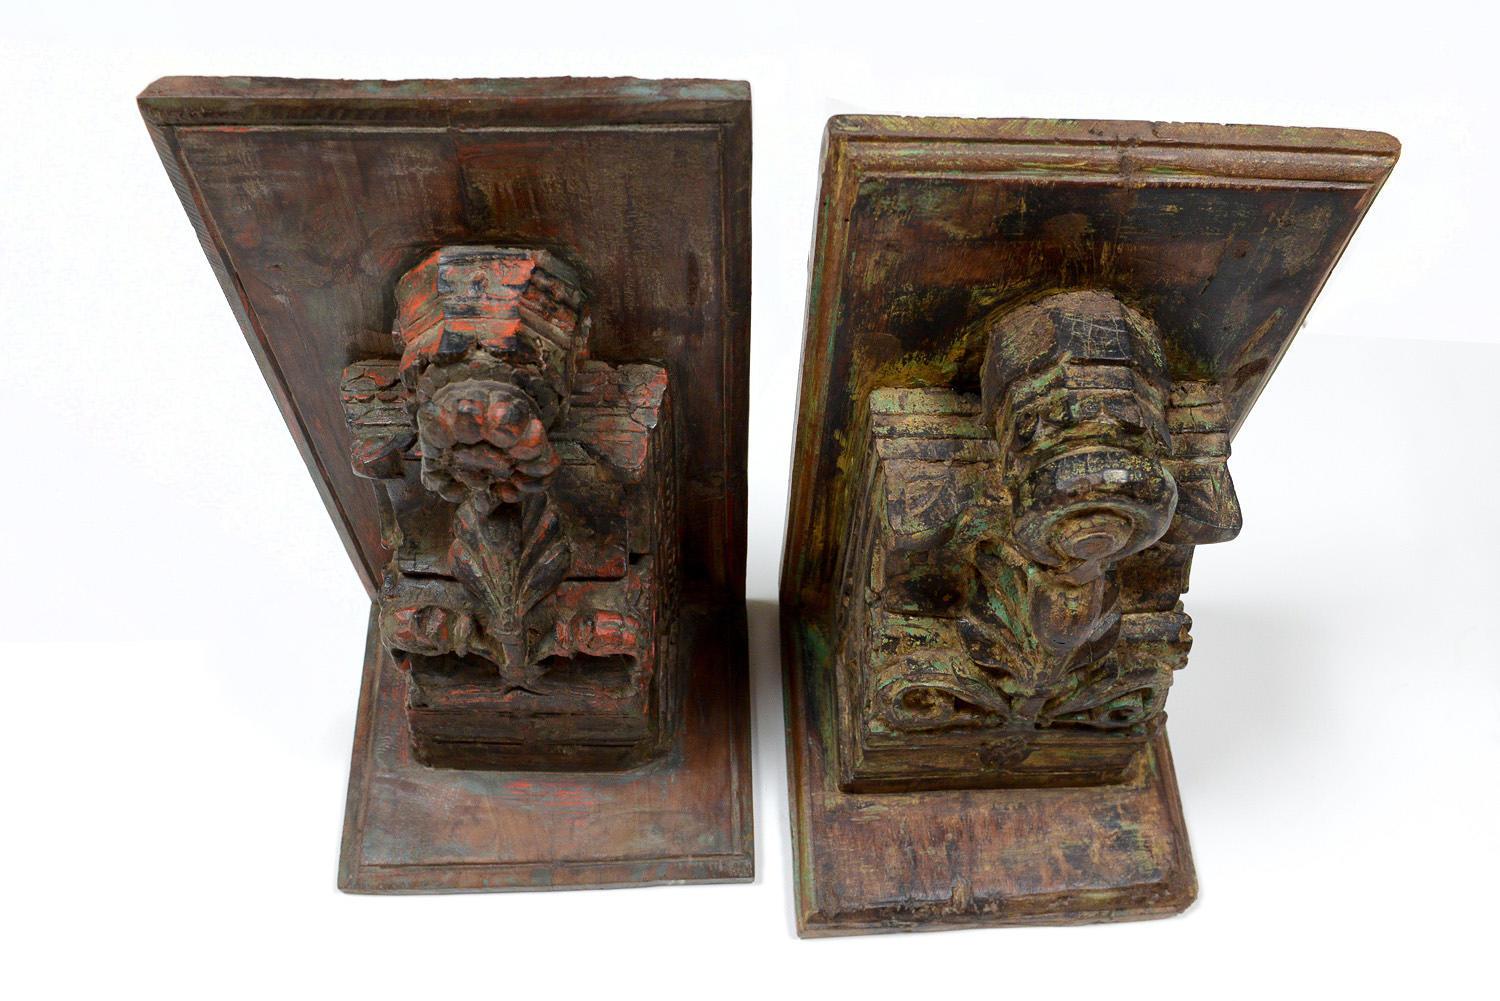 Two ornately hand carved wooden brackets. The one with the red paint remnants features a peacock with a floral surround (there is some damage to the main flower) Its dimensions are 29cm wide x 56cm high x 23.5cm deep. The one with the green paint